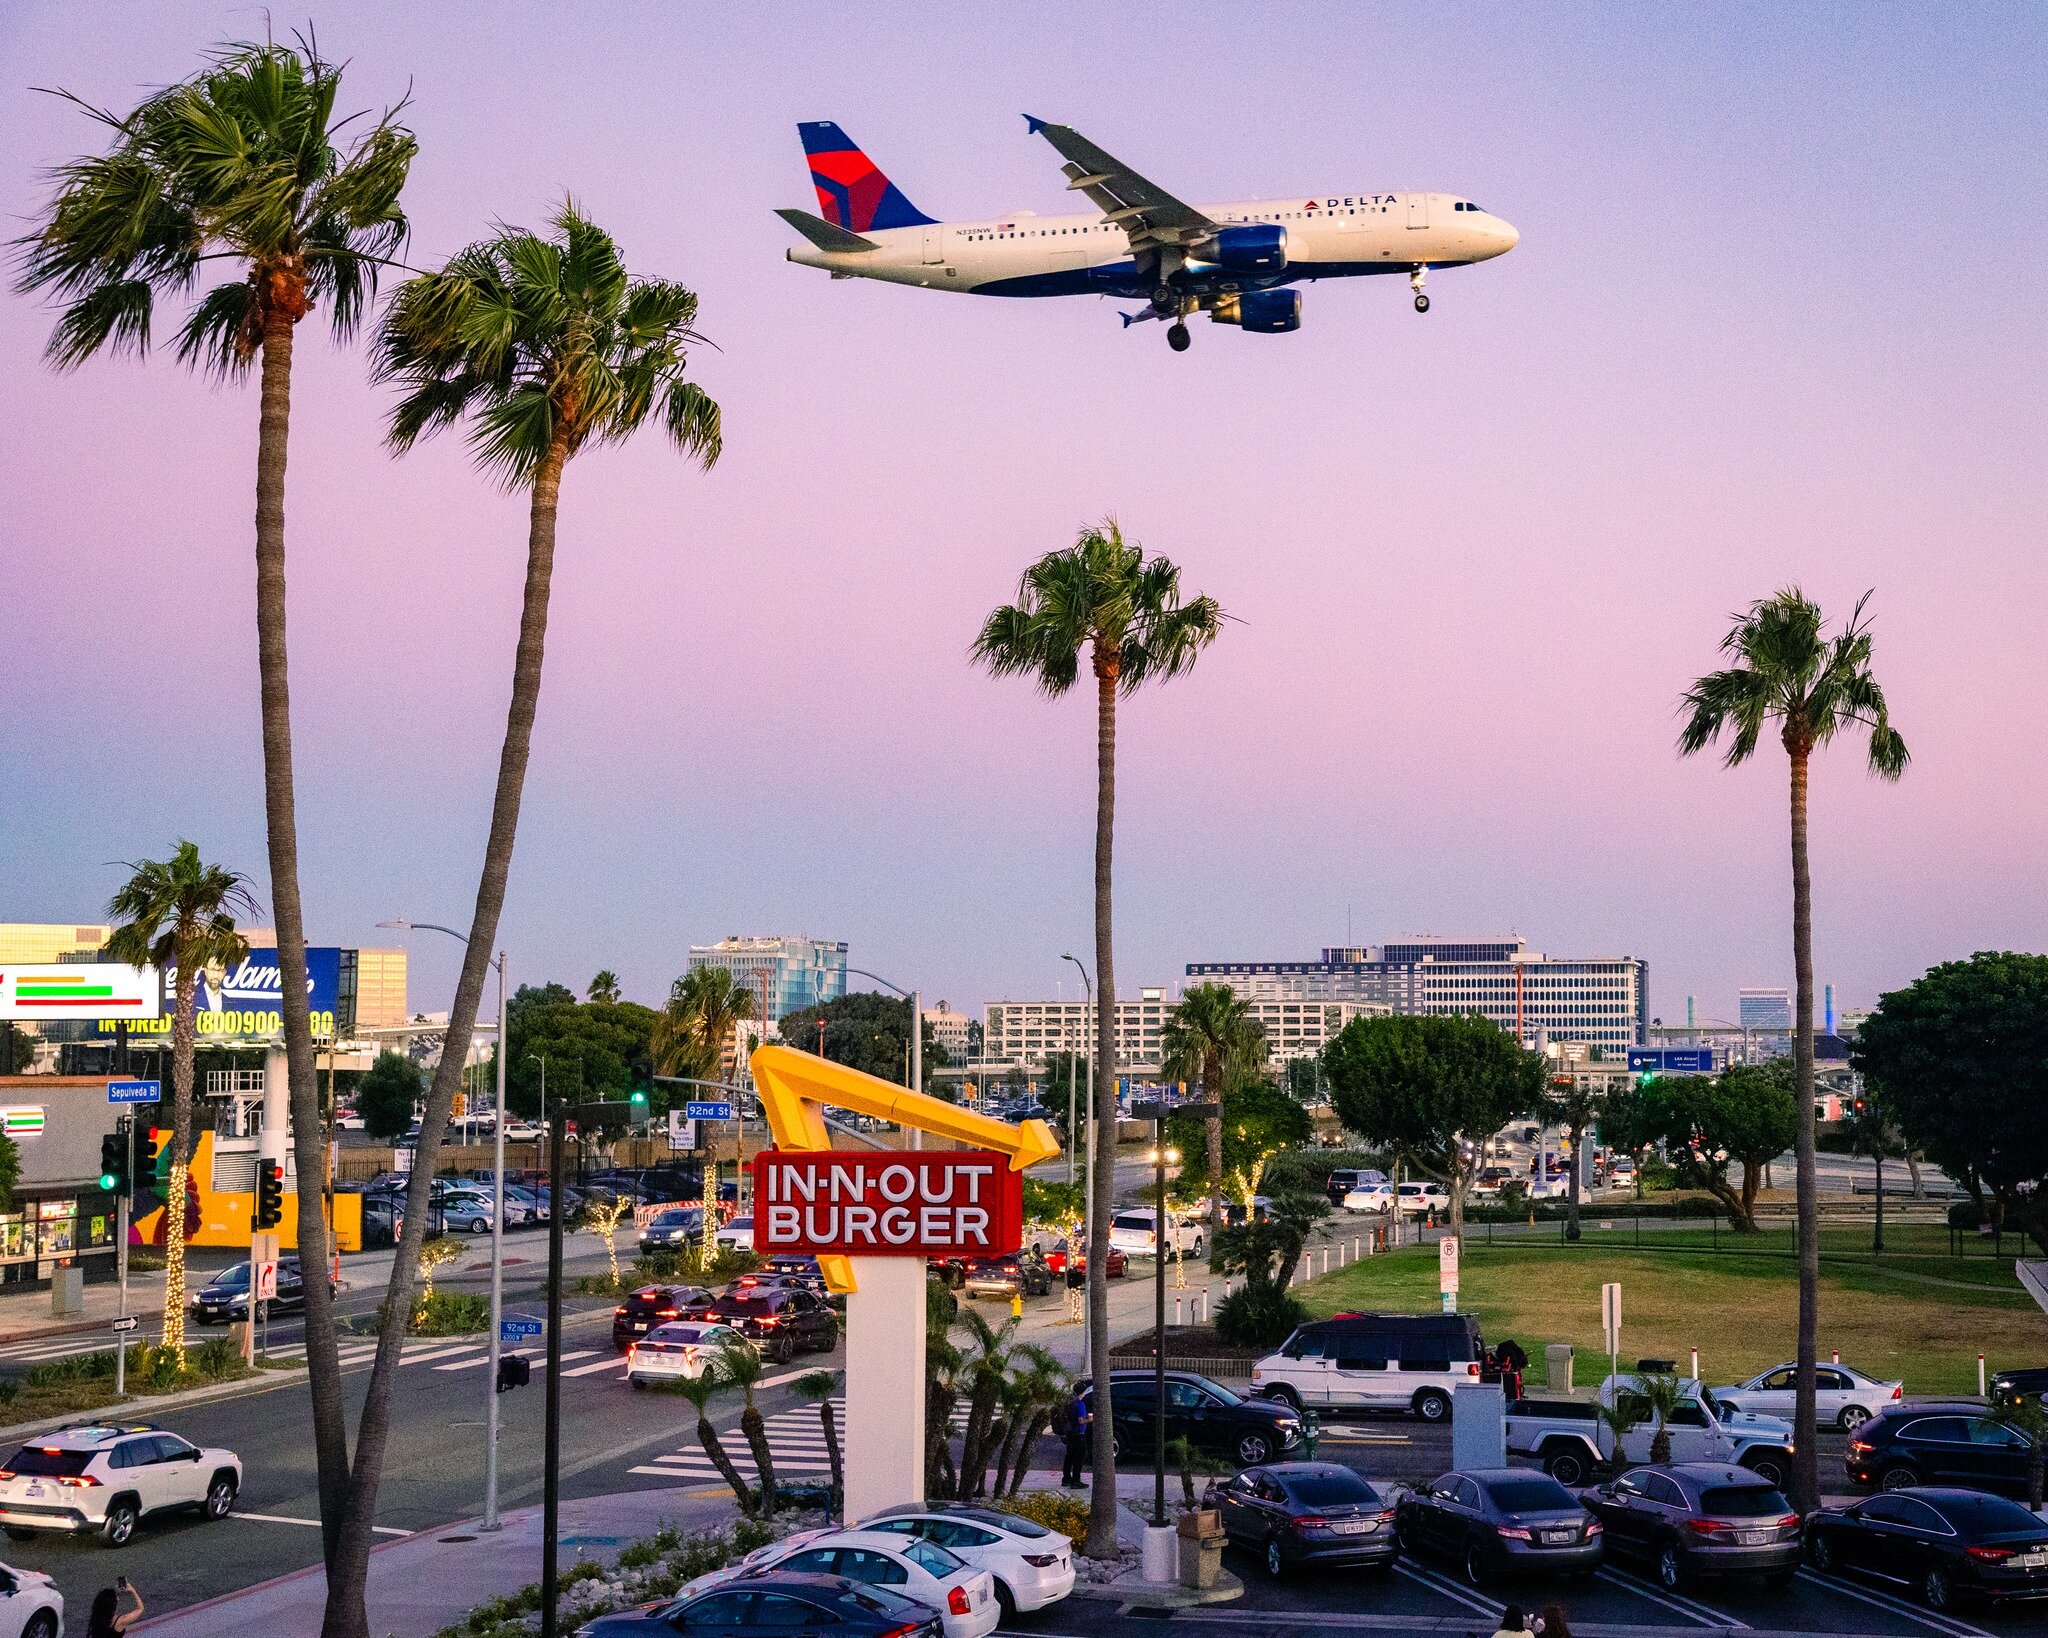 Sepulveda Boulevard, LAX. 🛬

A @delta flight landing at LAX on Wednesday evening. 

Stuff for the algorithm:
#landscapephoto #landscapephotography #landscape #cityphotography #losangeles #lax #photos #photoshoot #photosession #photostudio #canonphot